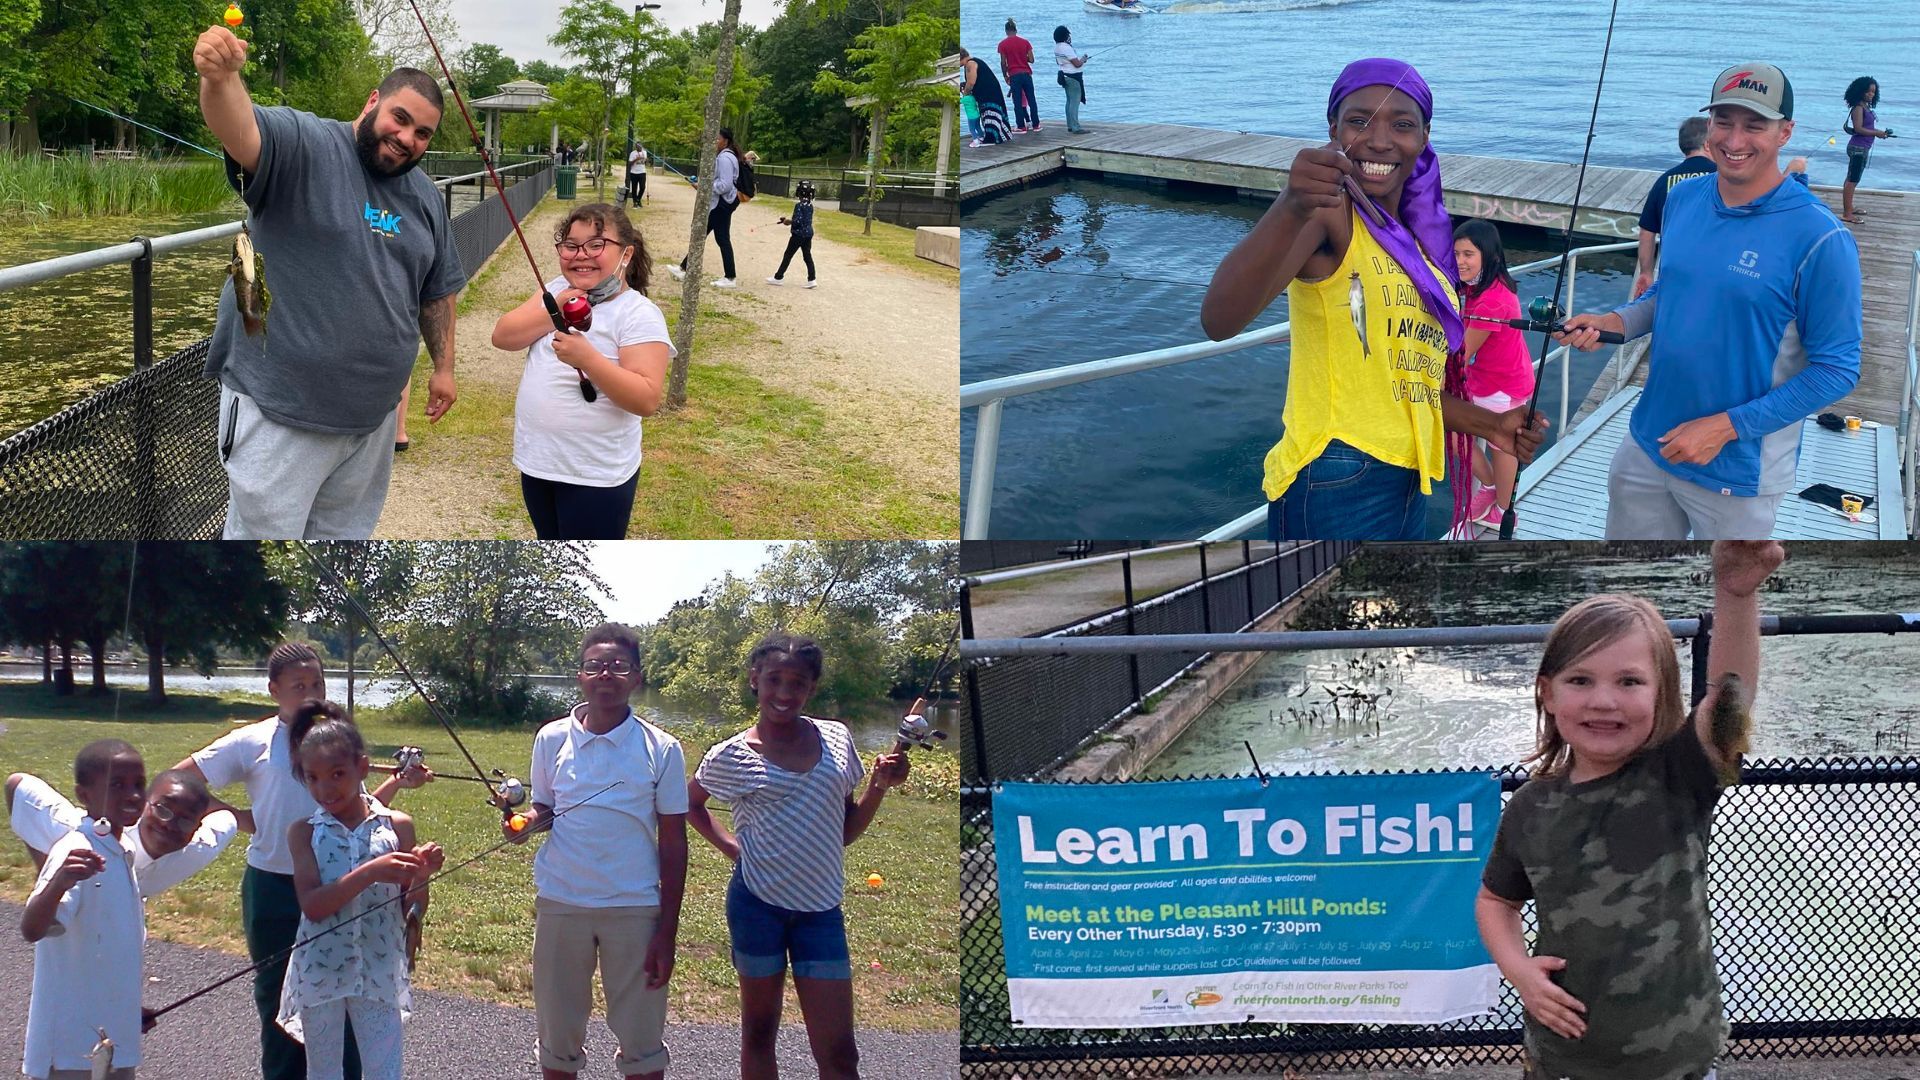 Four photos in a collage showing children and adults smiling while fishing.